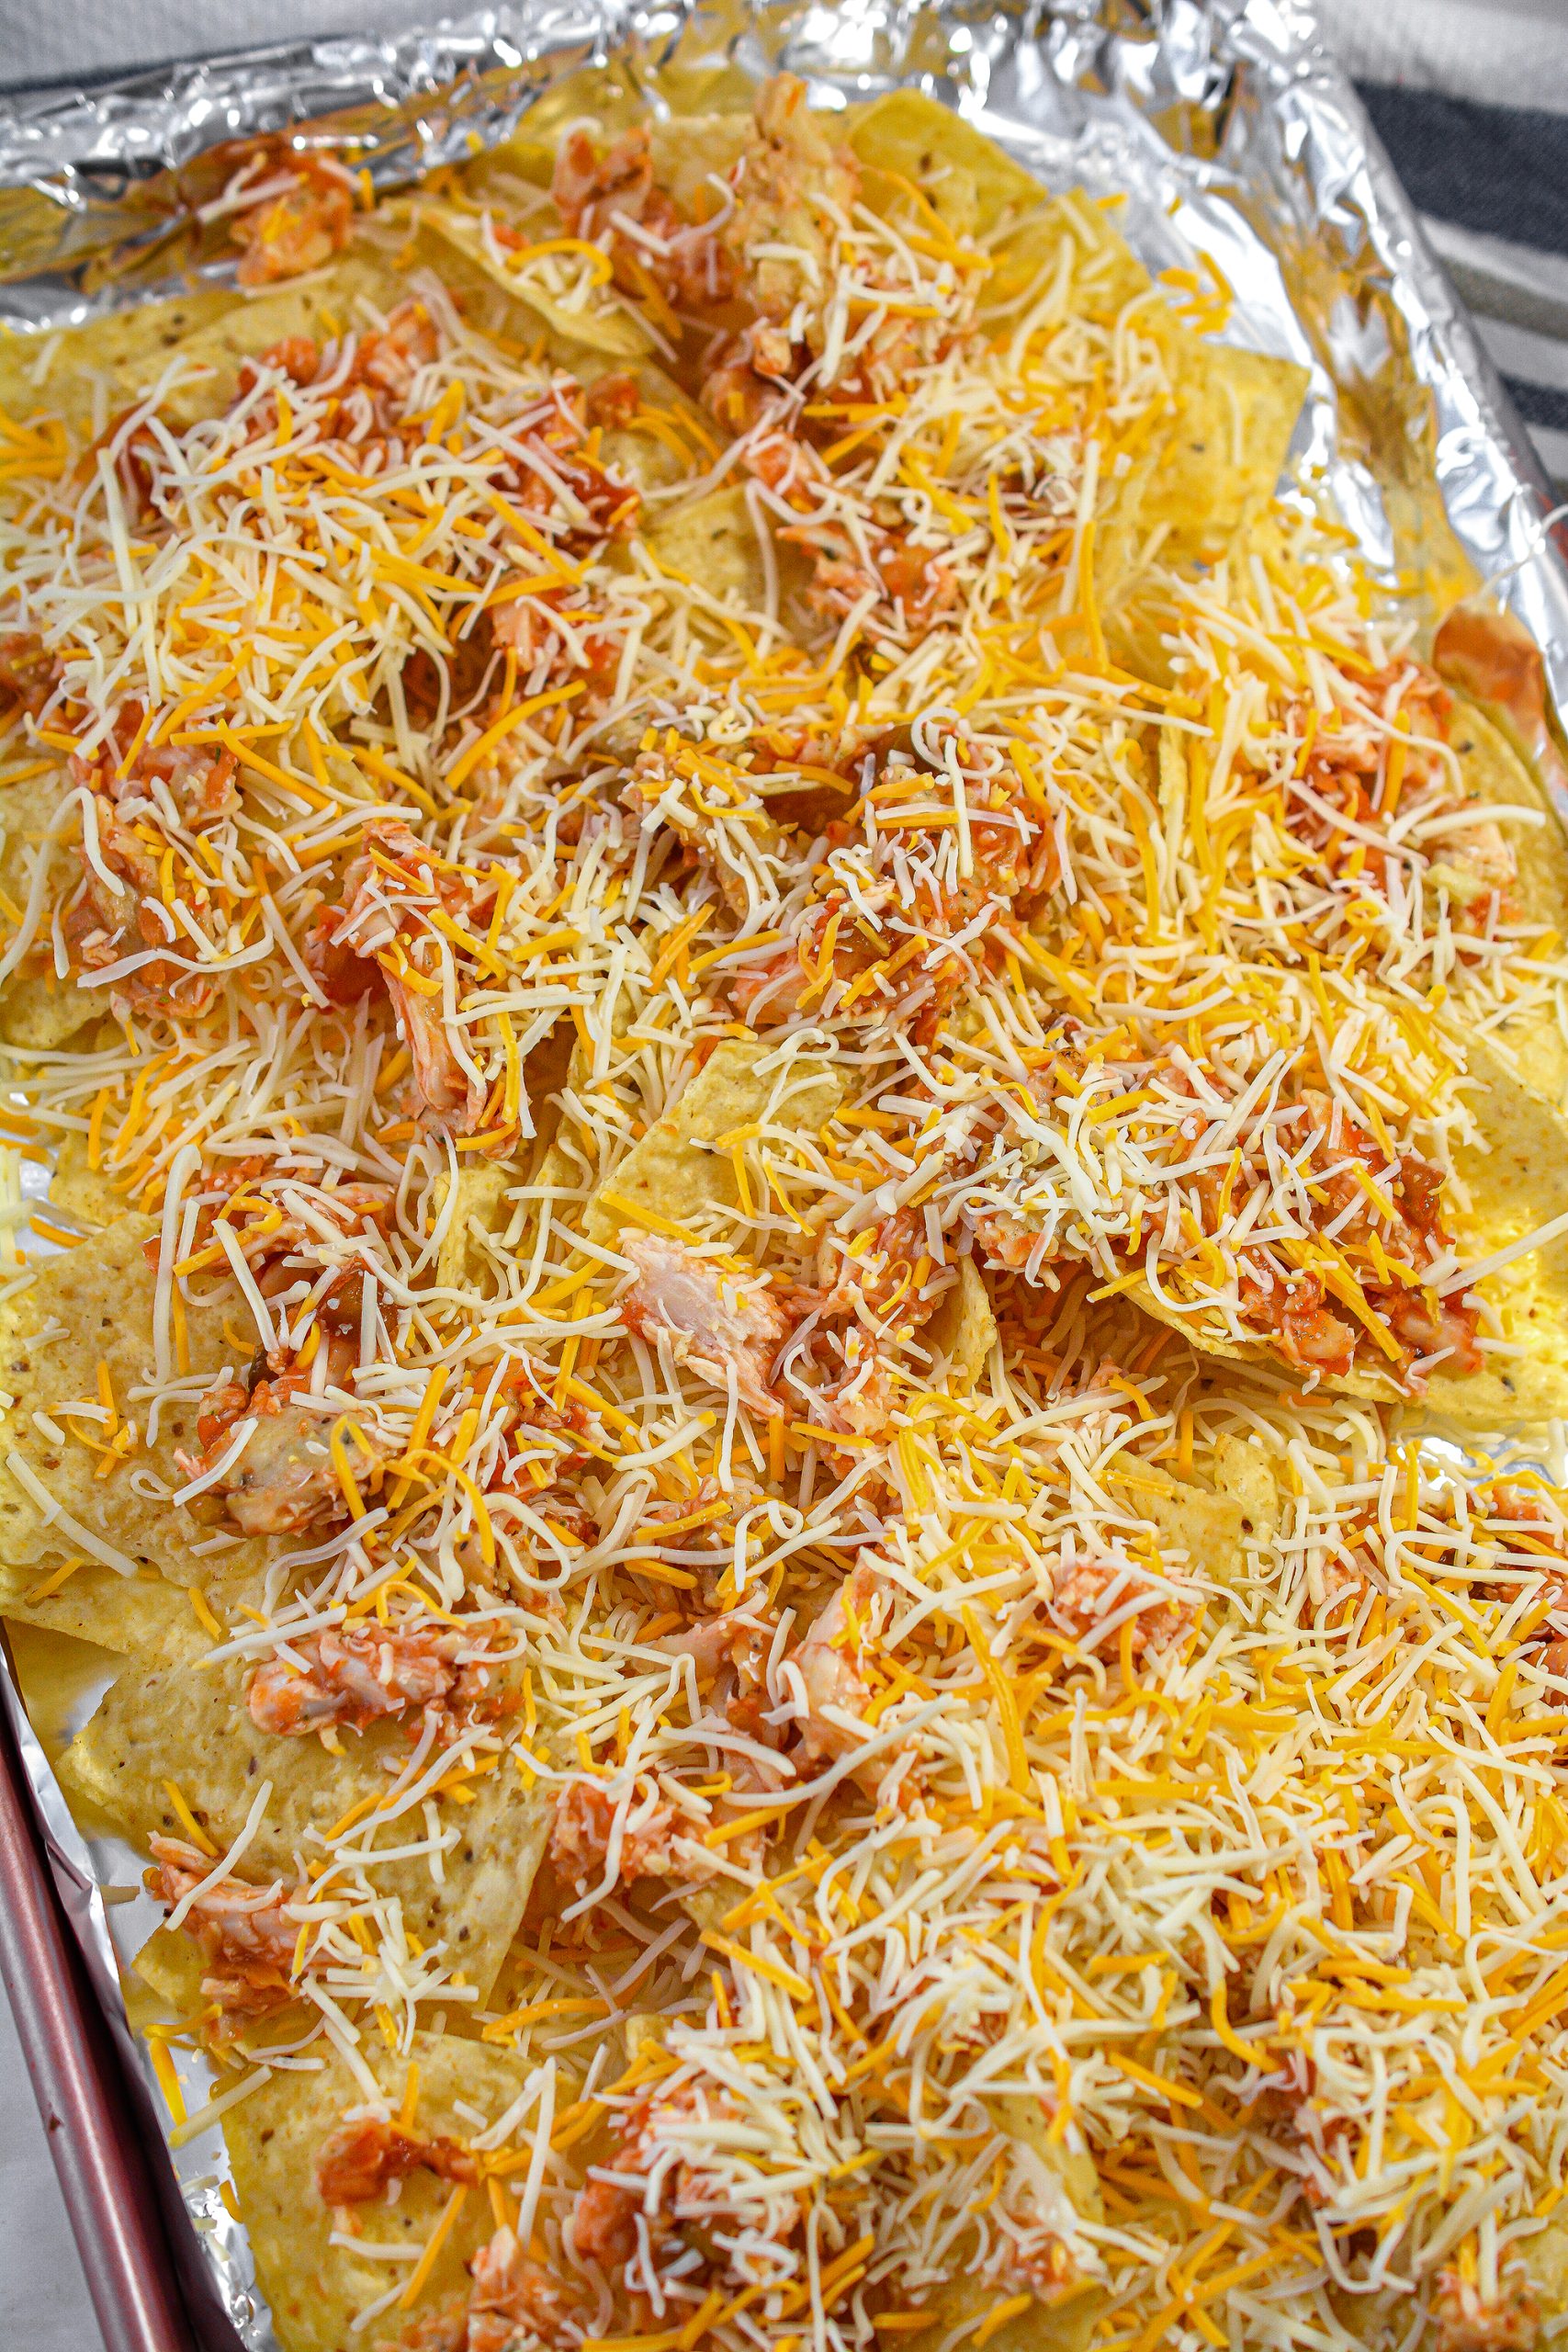 Layer half of the chicken on top of the chips and then sprinkle with half of the cheese.